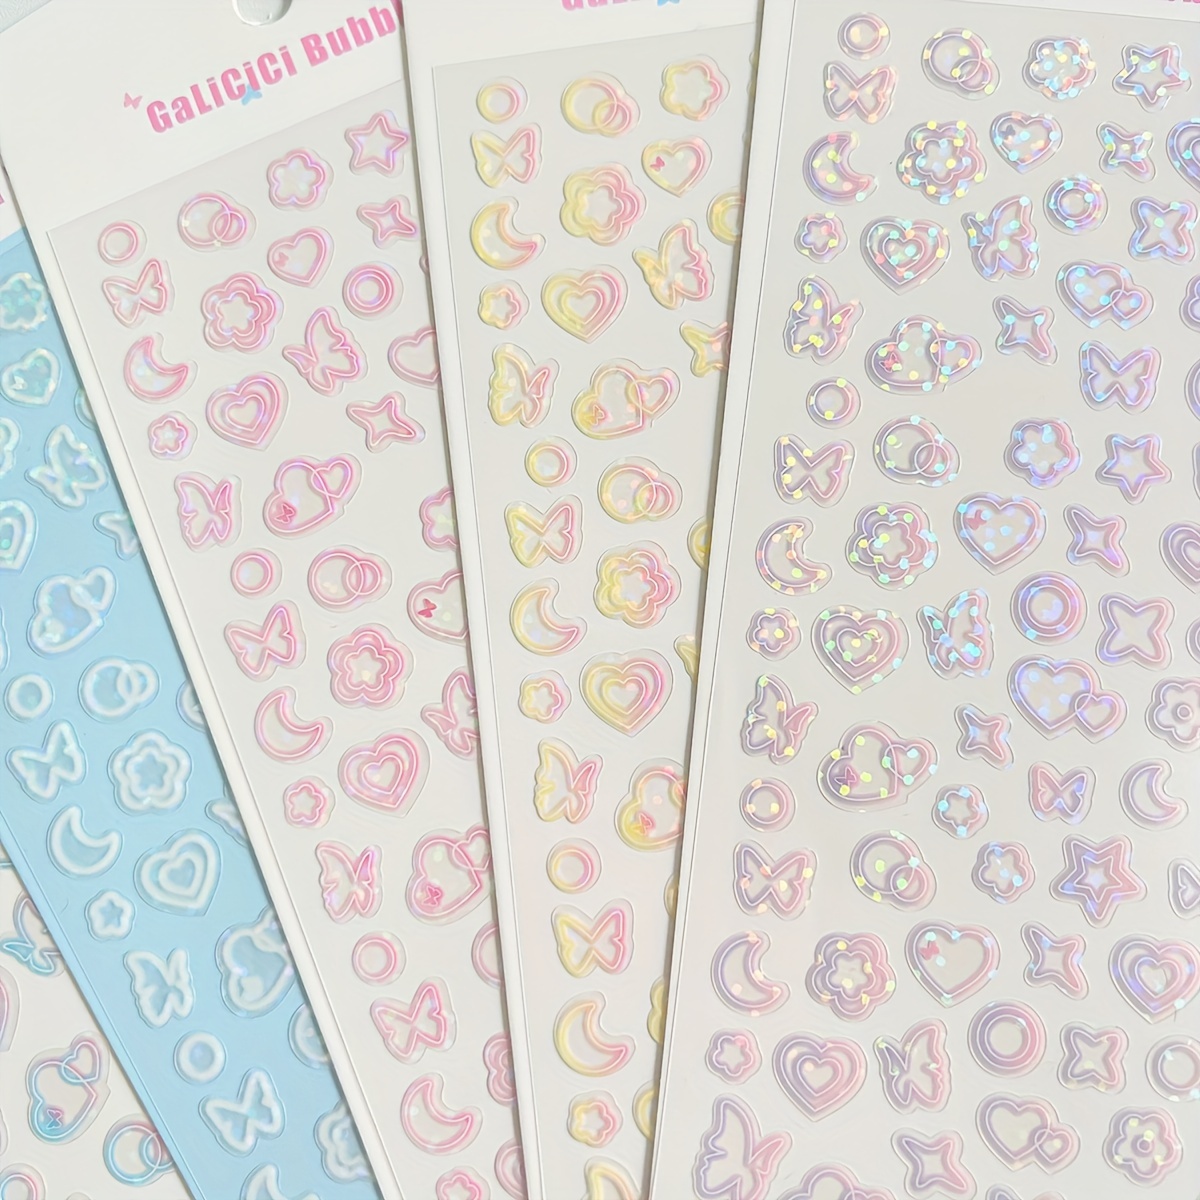 2000pcs Scrapbook Stickers, Butterfly Stars Ribbon Letter Dot Flowers  Scrapbooking Stickers Kit Transparent Waterproof For Holiday Scrapbook  Supplies